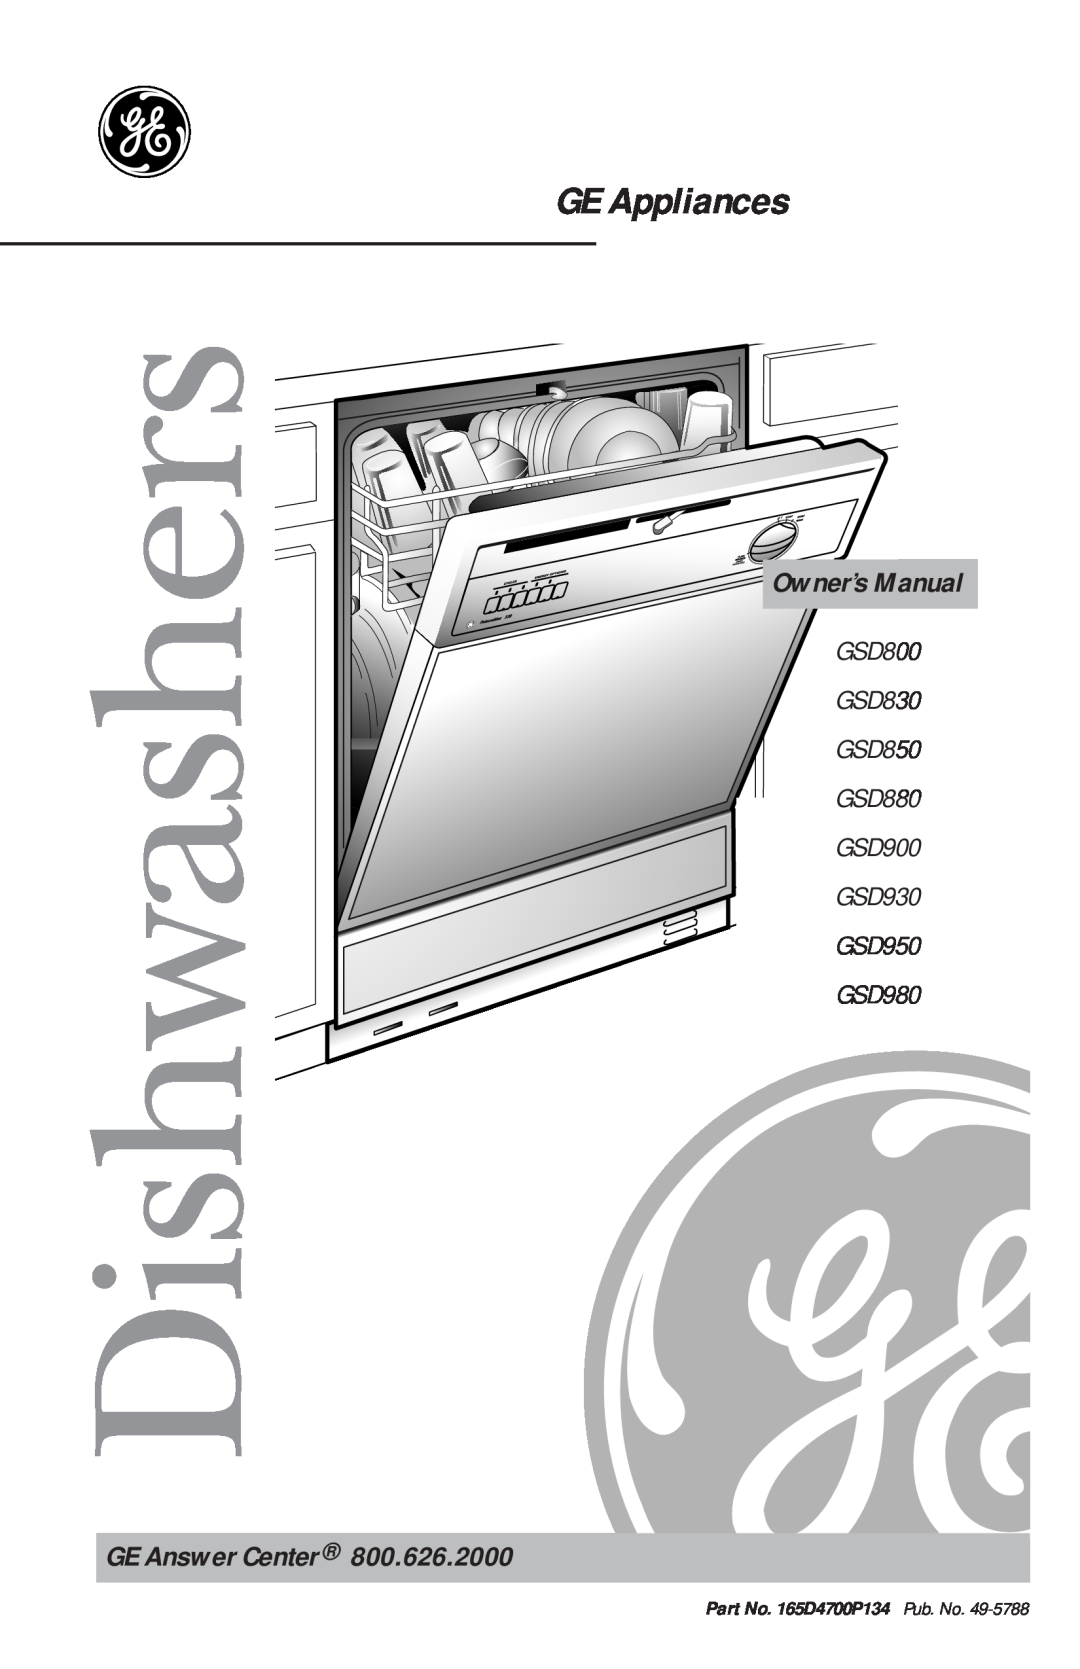 GE GSD980 warranty Operating Instrudions, ~ps, Care and Cleaning, Preparation, Consumer Services, Dishwasher, l3-l5 